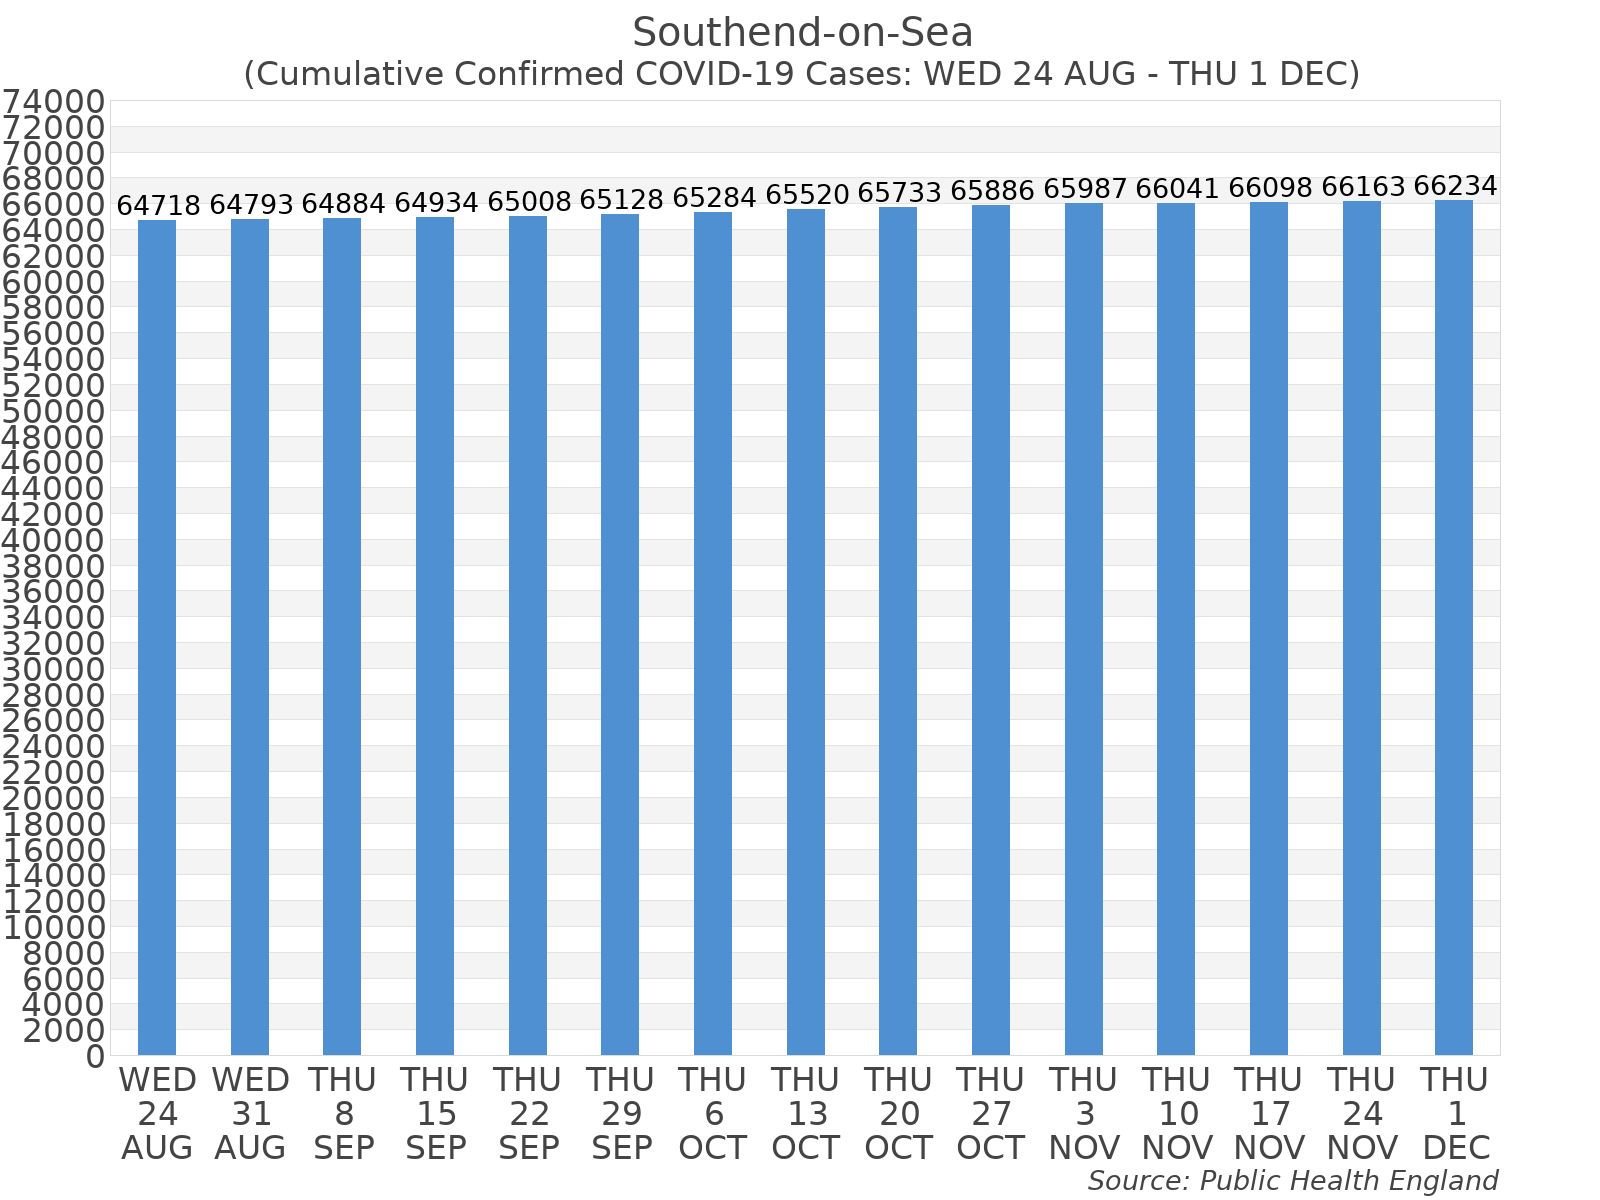 Graph tracking the number of confirmed coronavirus (COVID-19) cases where the patient lives within the Southend-on-Sea Upper Tier Local Authority Area.